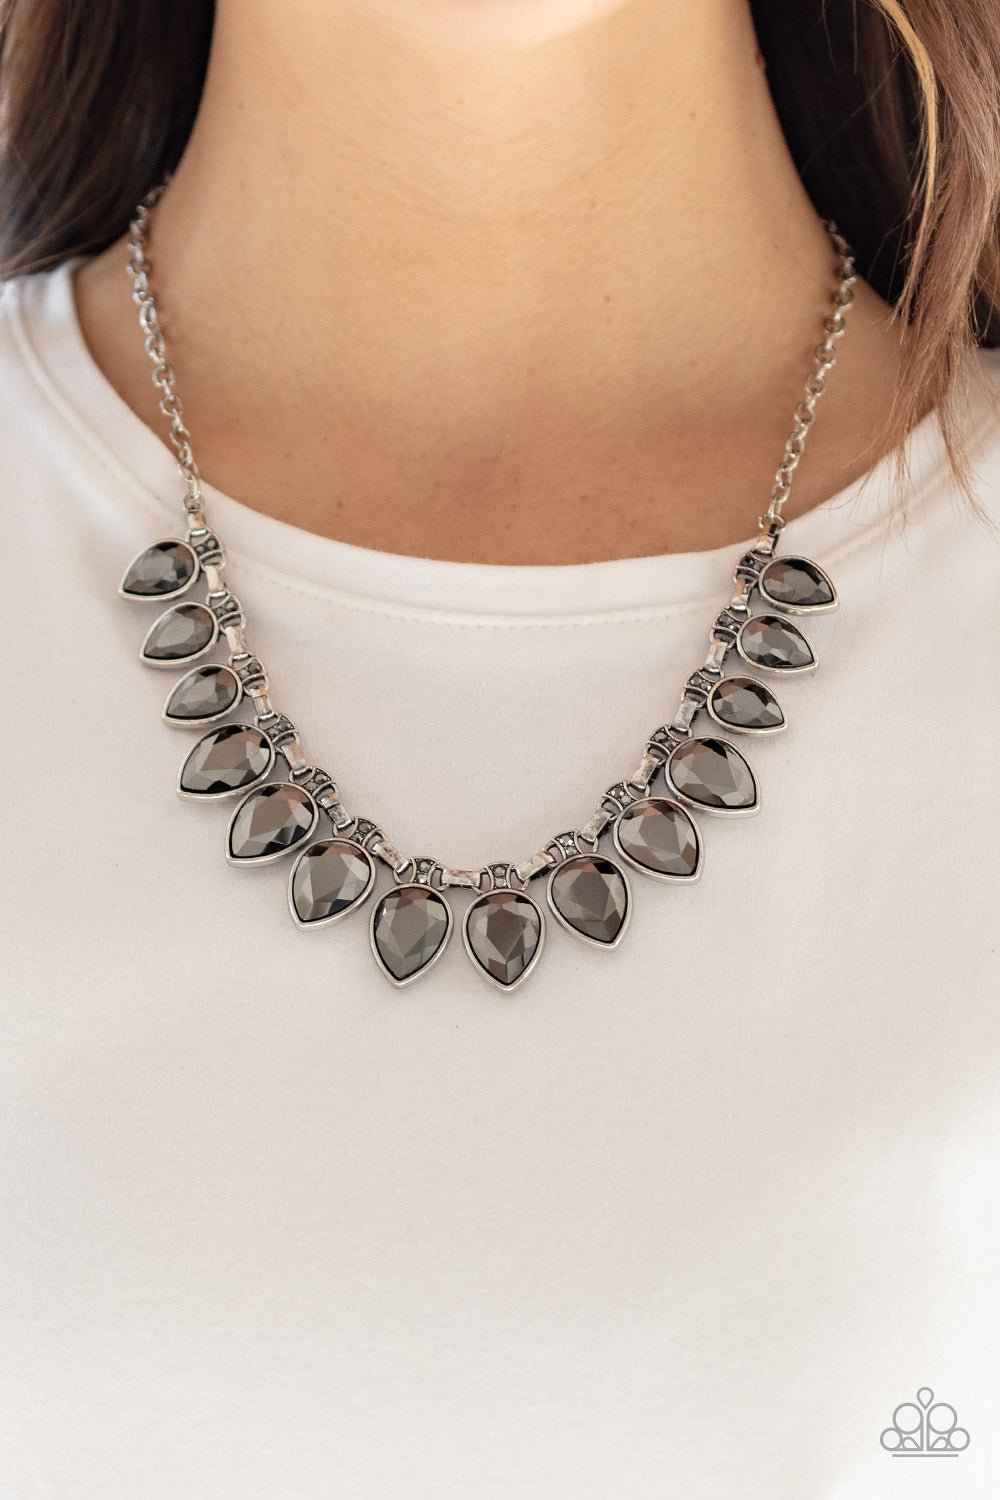 FEARLESS is More Silver Necklace - Paparazzi Accessories Item #N455 Dotted with dainty hematite rhinestones, a fierce fringe of oversized hematite teardrop frames fan out below the collar for a fearless fashion. Features an adjustable clasp closure. All Paparazzi Accessories are lead free and nickel free!  Sold as one individual necklace. Includes one pair of matching earrings.